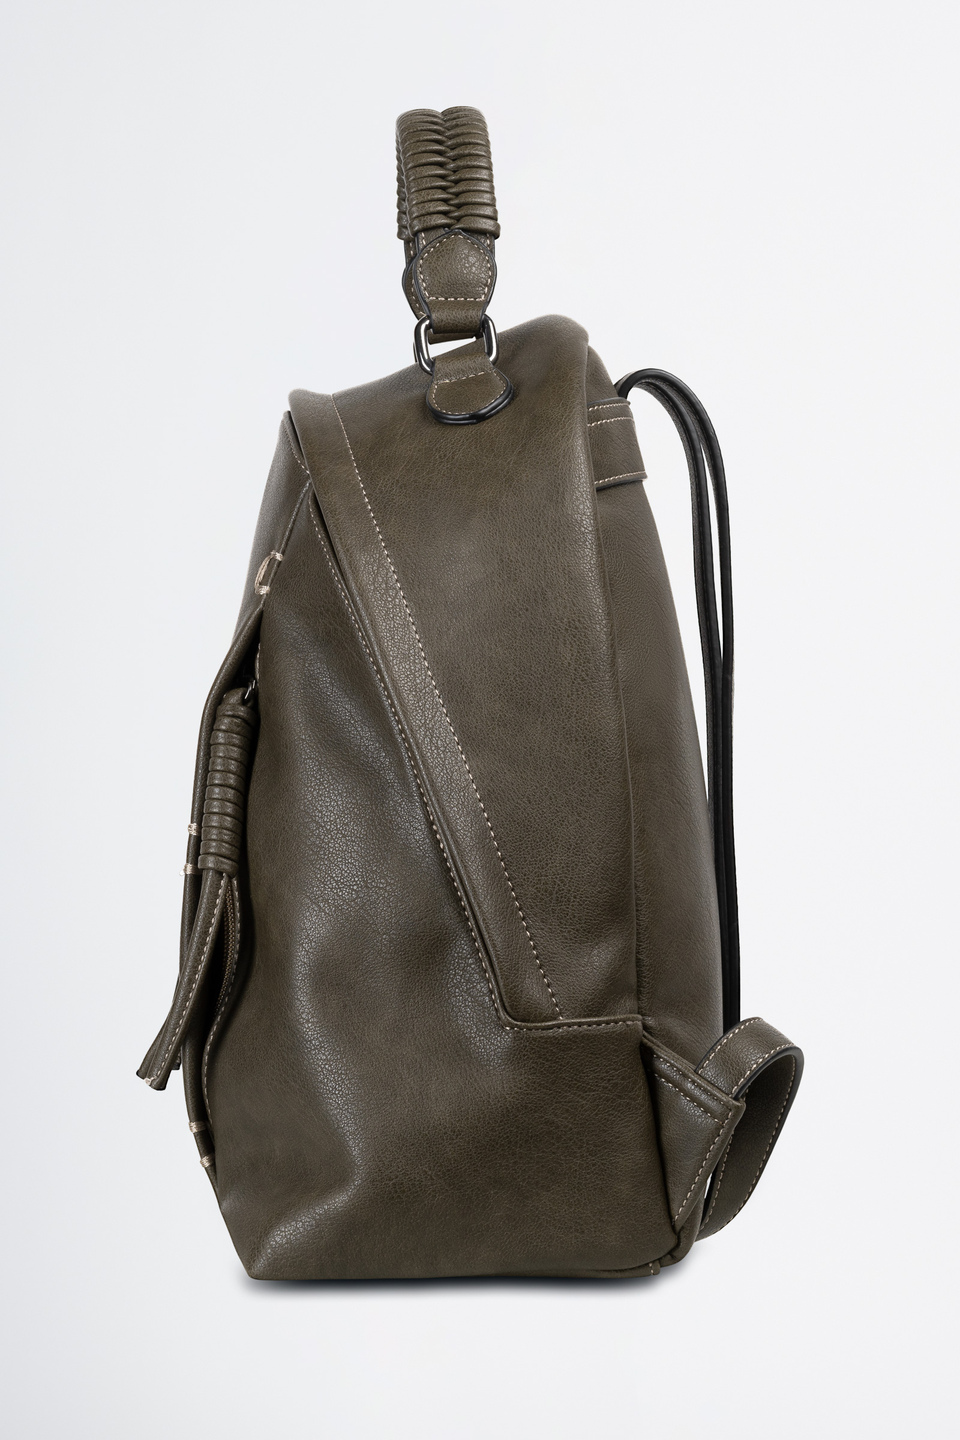 Backpack in aged PU fabric | La Martina - Official Online Shop